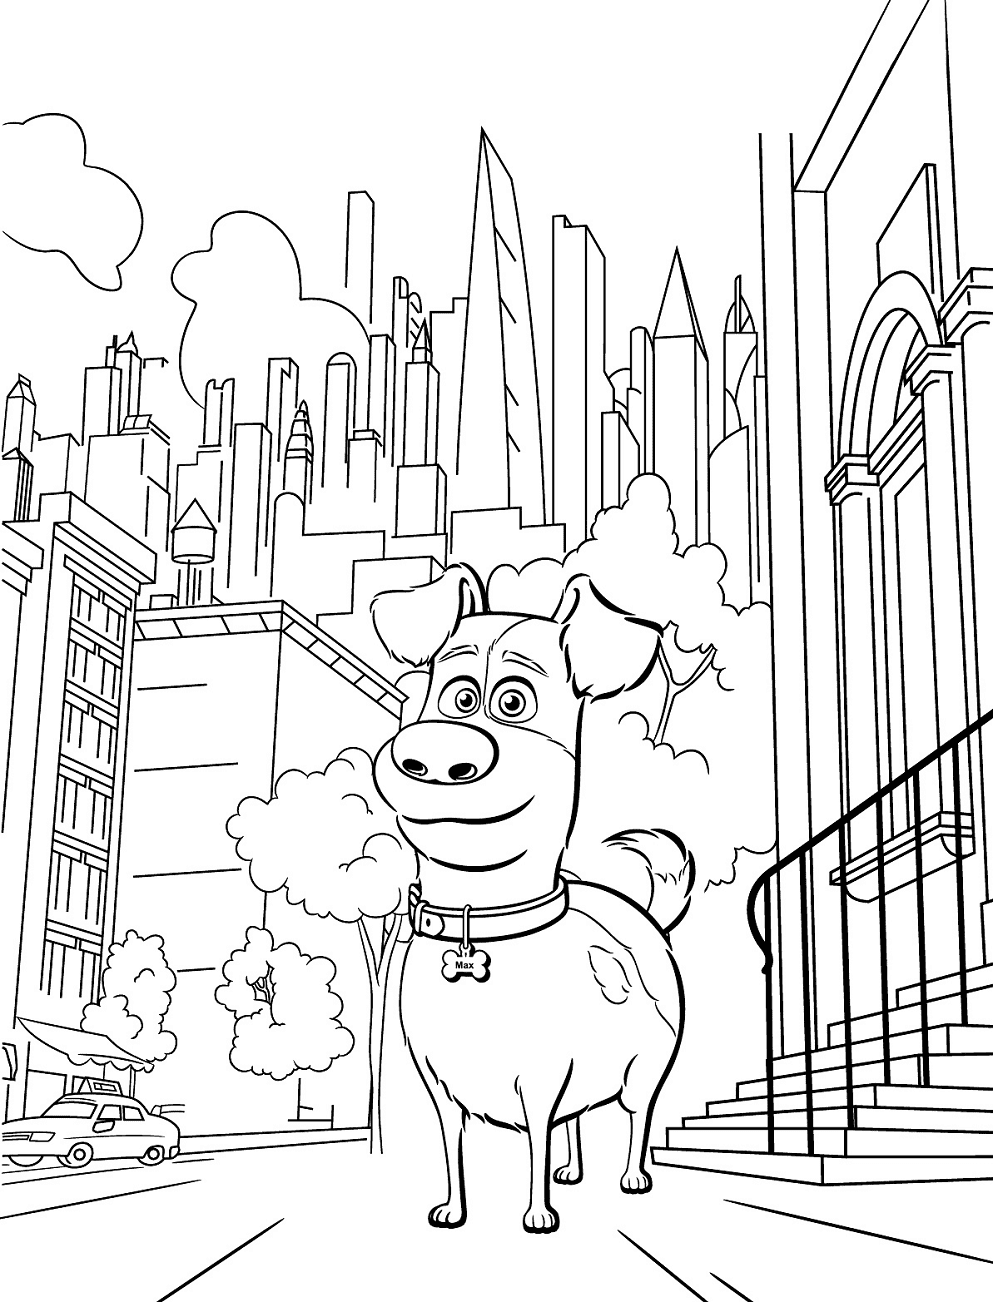 Max in the city Coloring Page